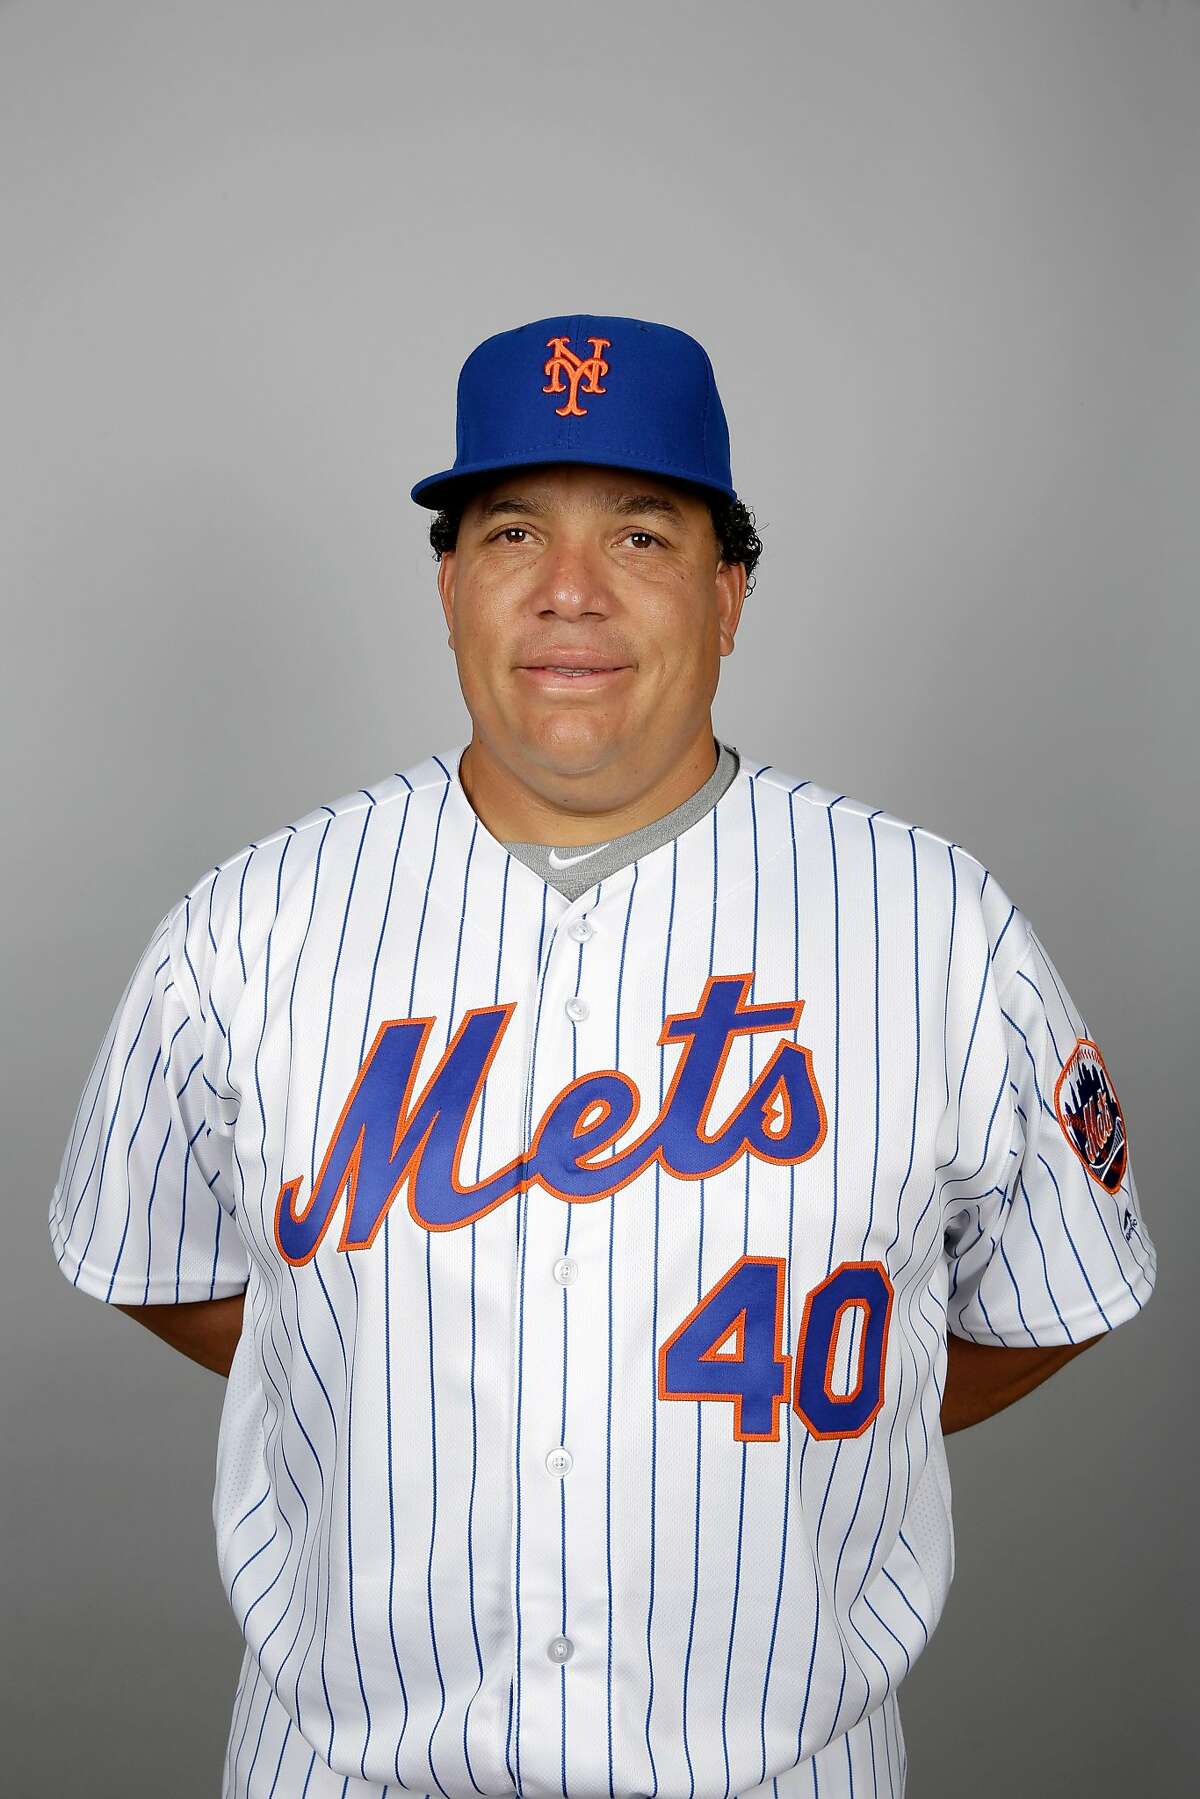 Lovable Bartolo Colon gets a pass, unlike other PED users